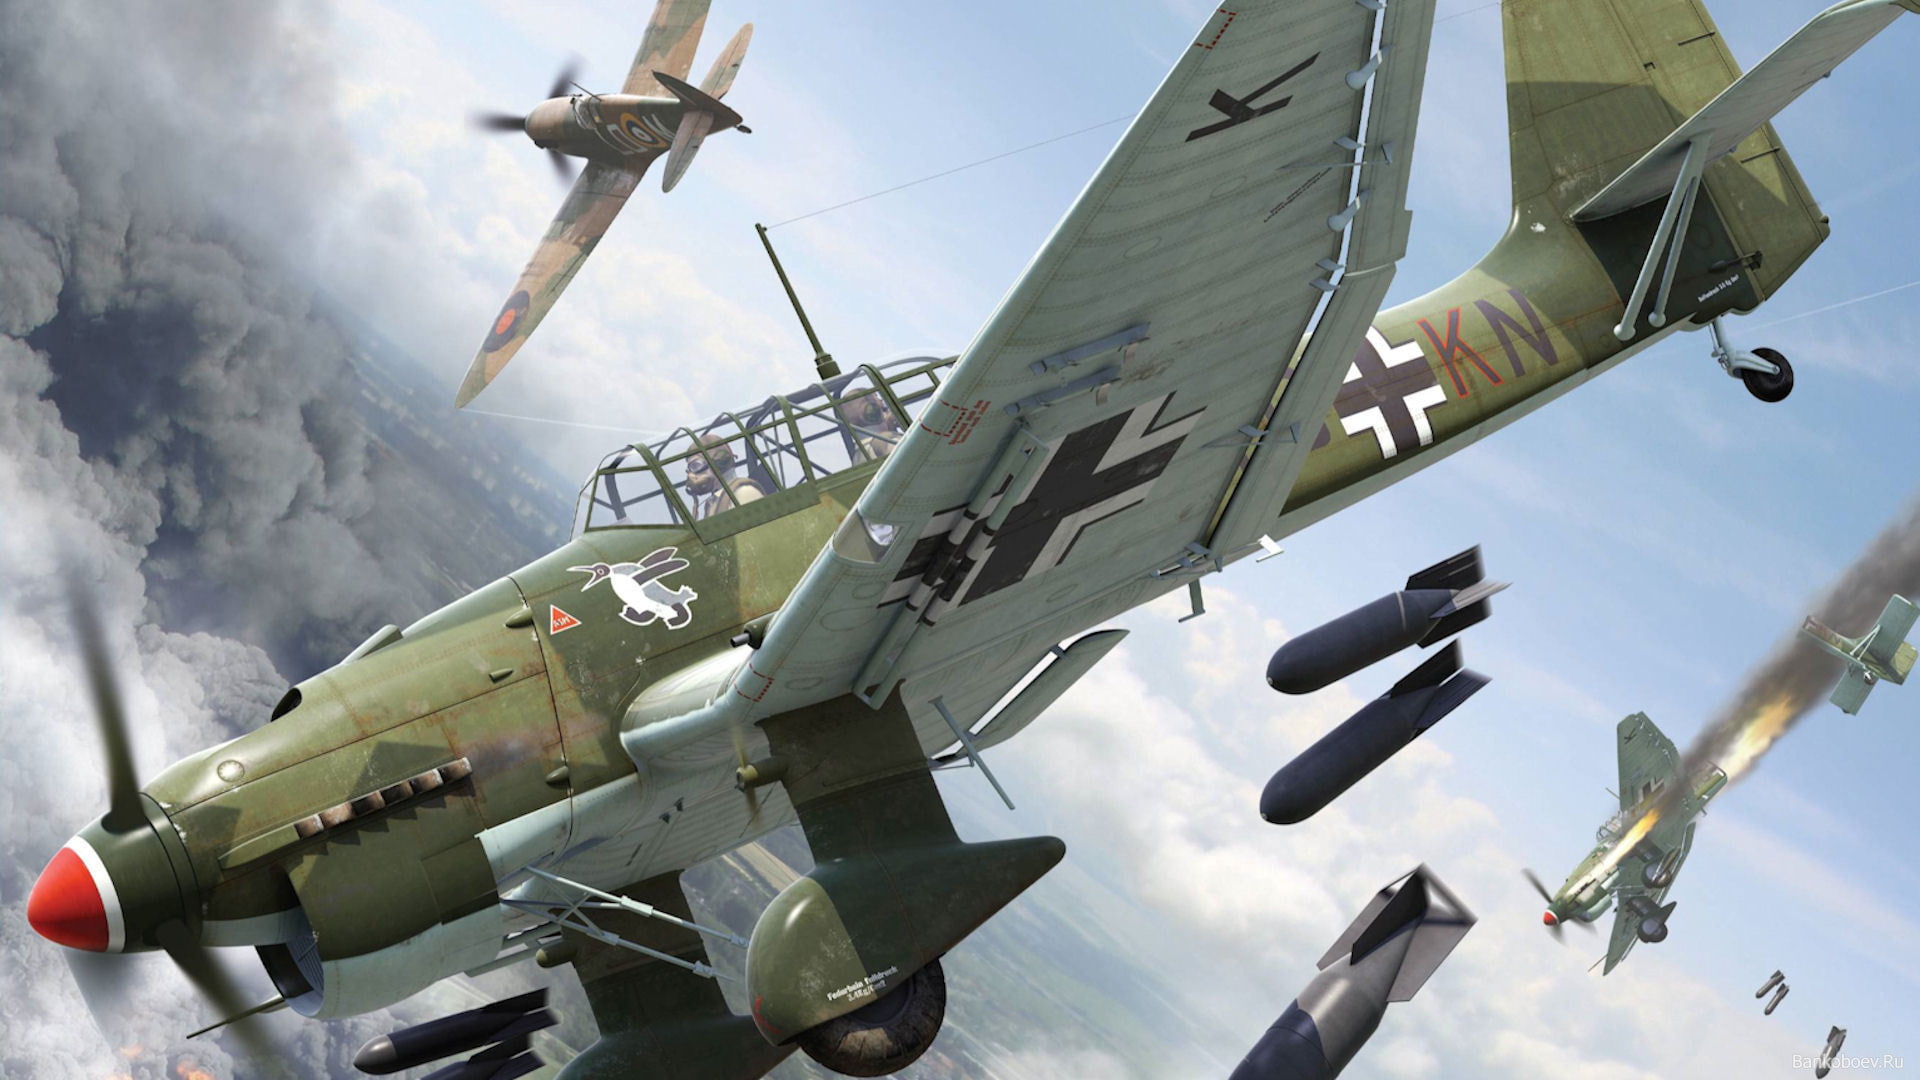 attack, bomber, bombs, dive, dogfight, fire, ju 87, junkers